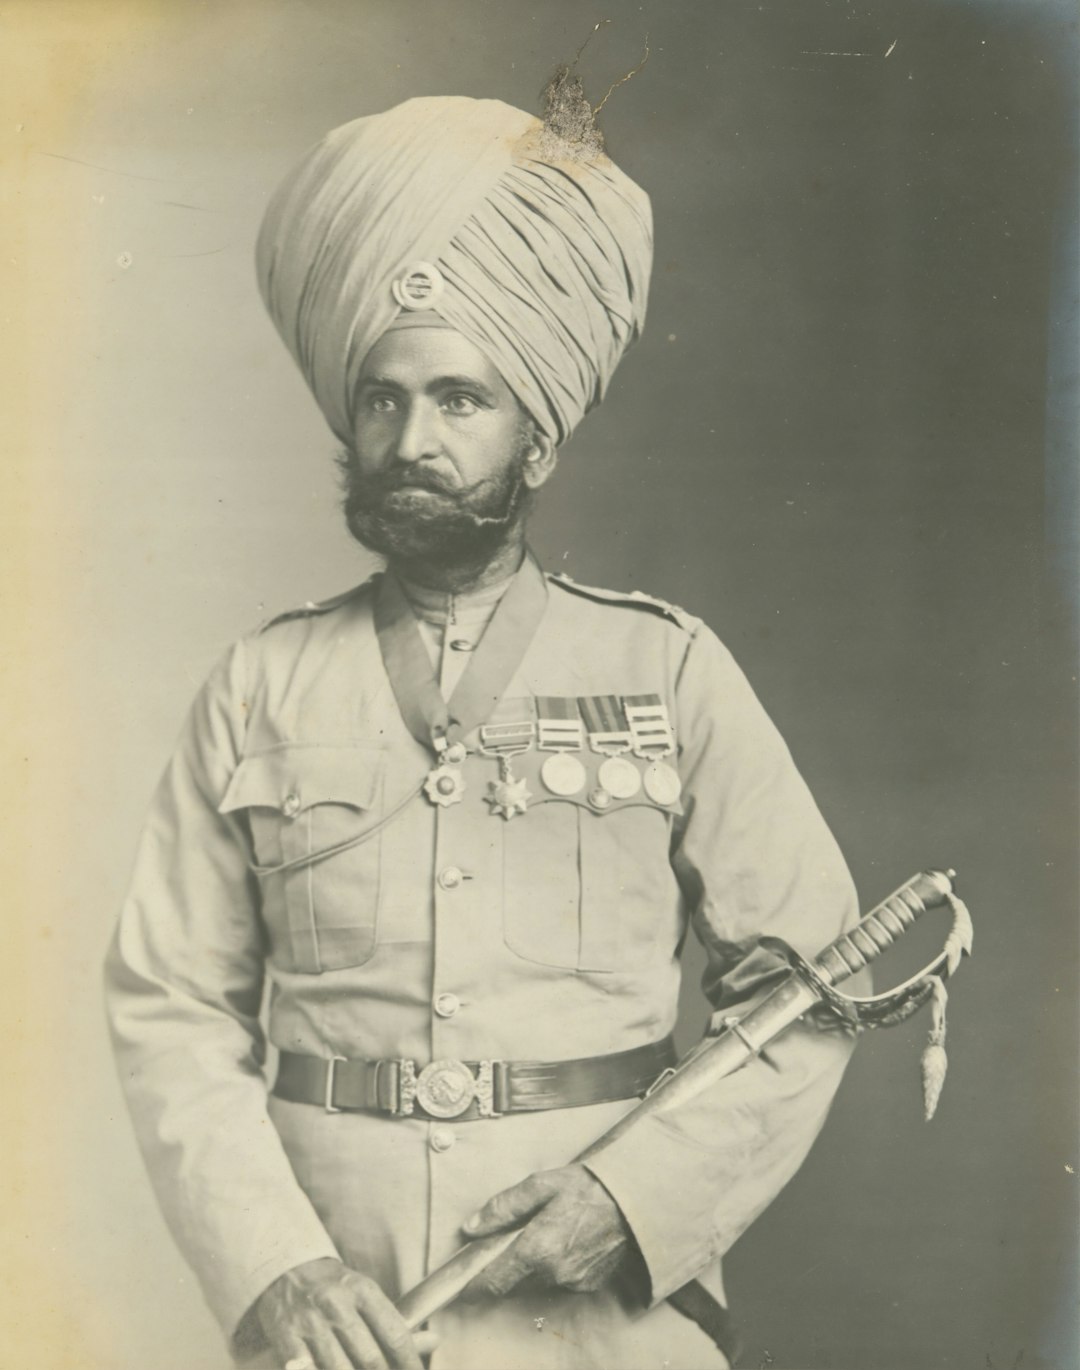 Man in military dress and turban in 1889